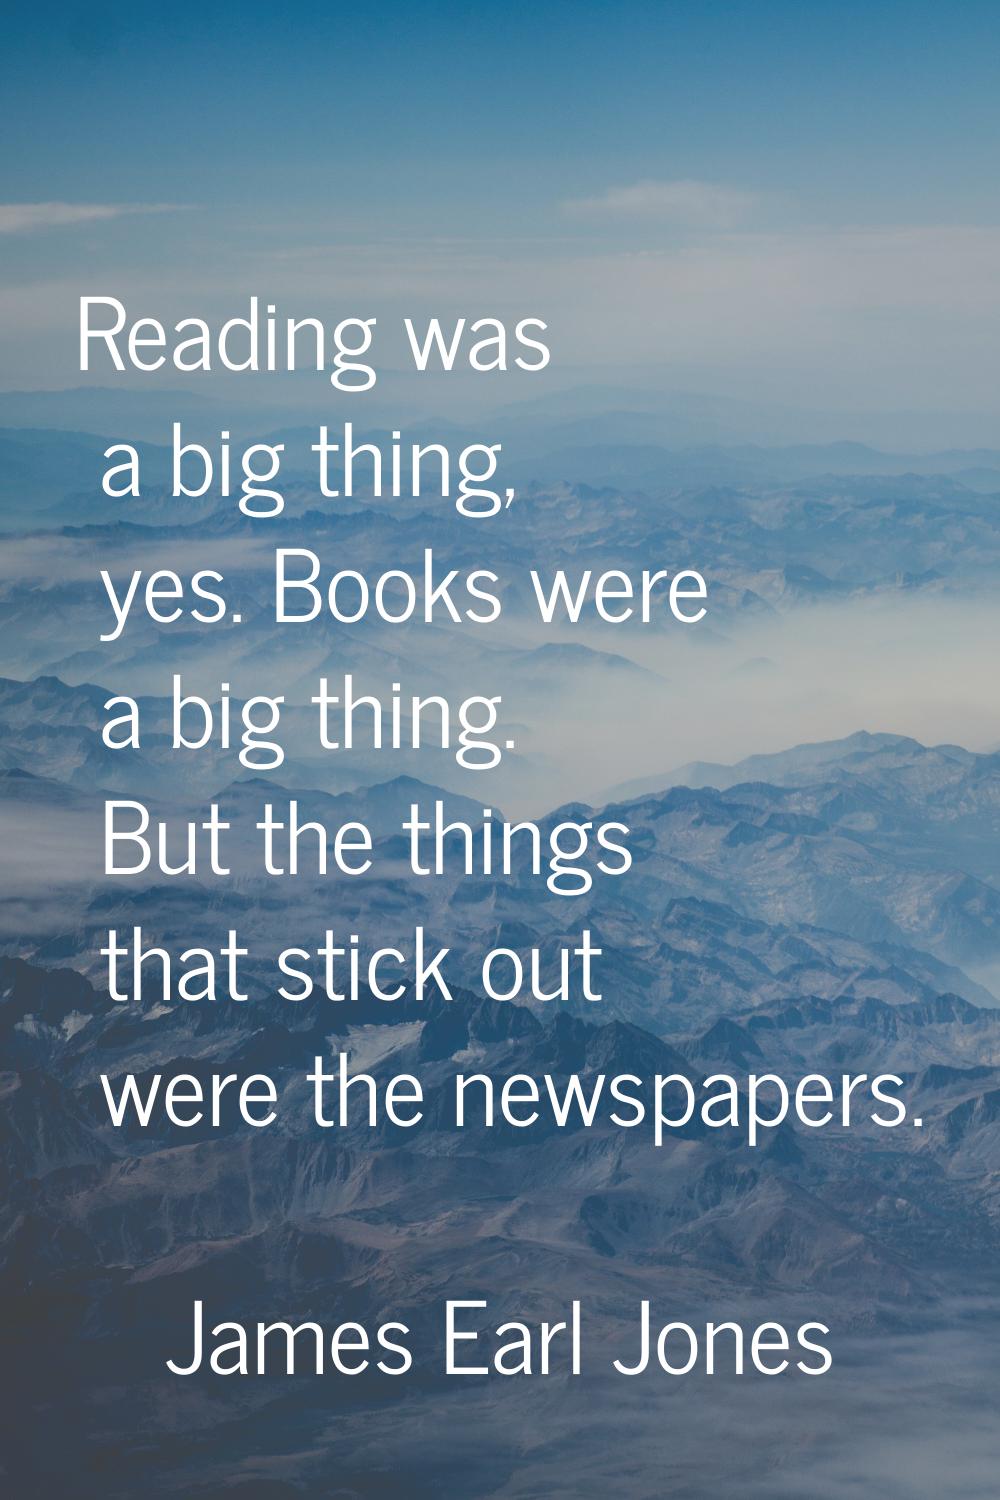 Reading was a big thing, yes. Books were a big thing. But the things that stick out were the newspa